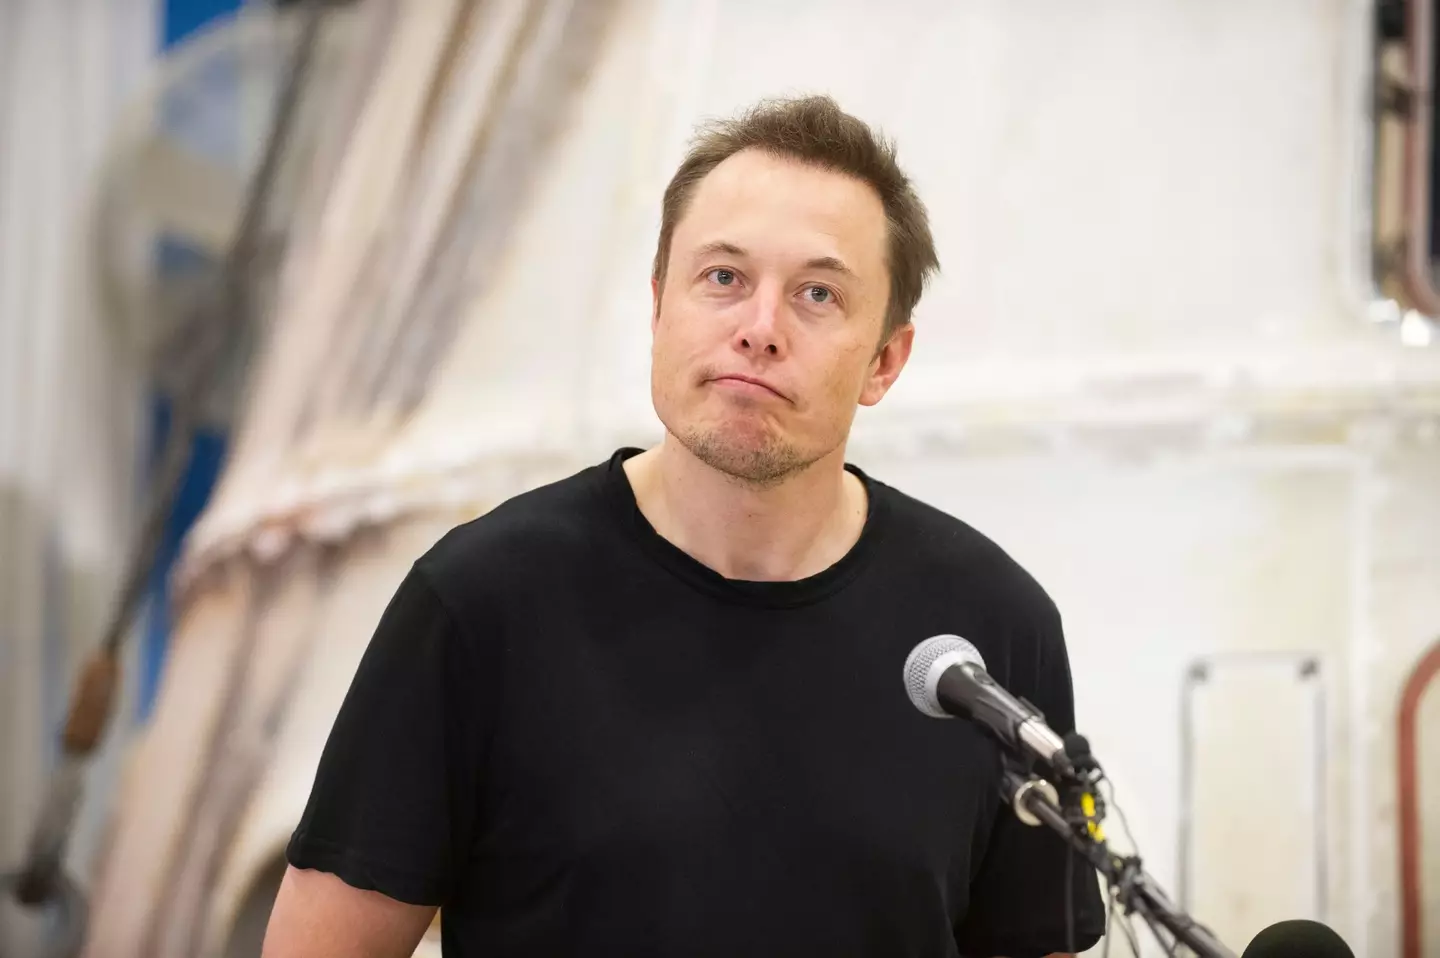 Elon Musk is on track to become the world’s first trillionaire.